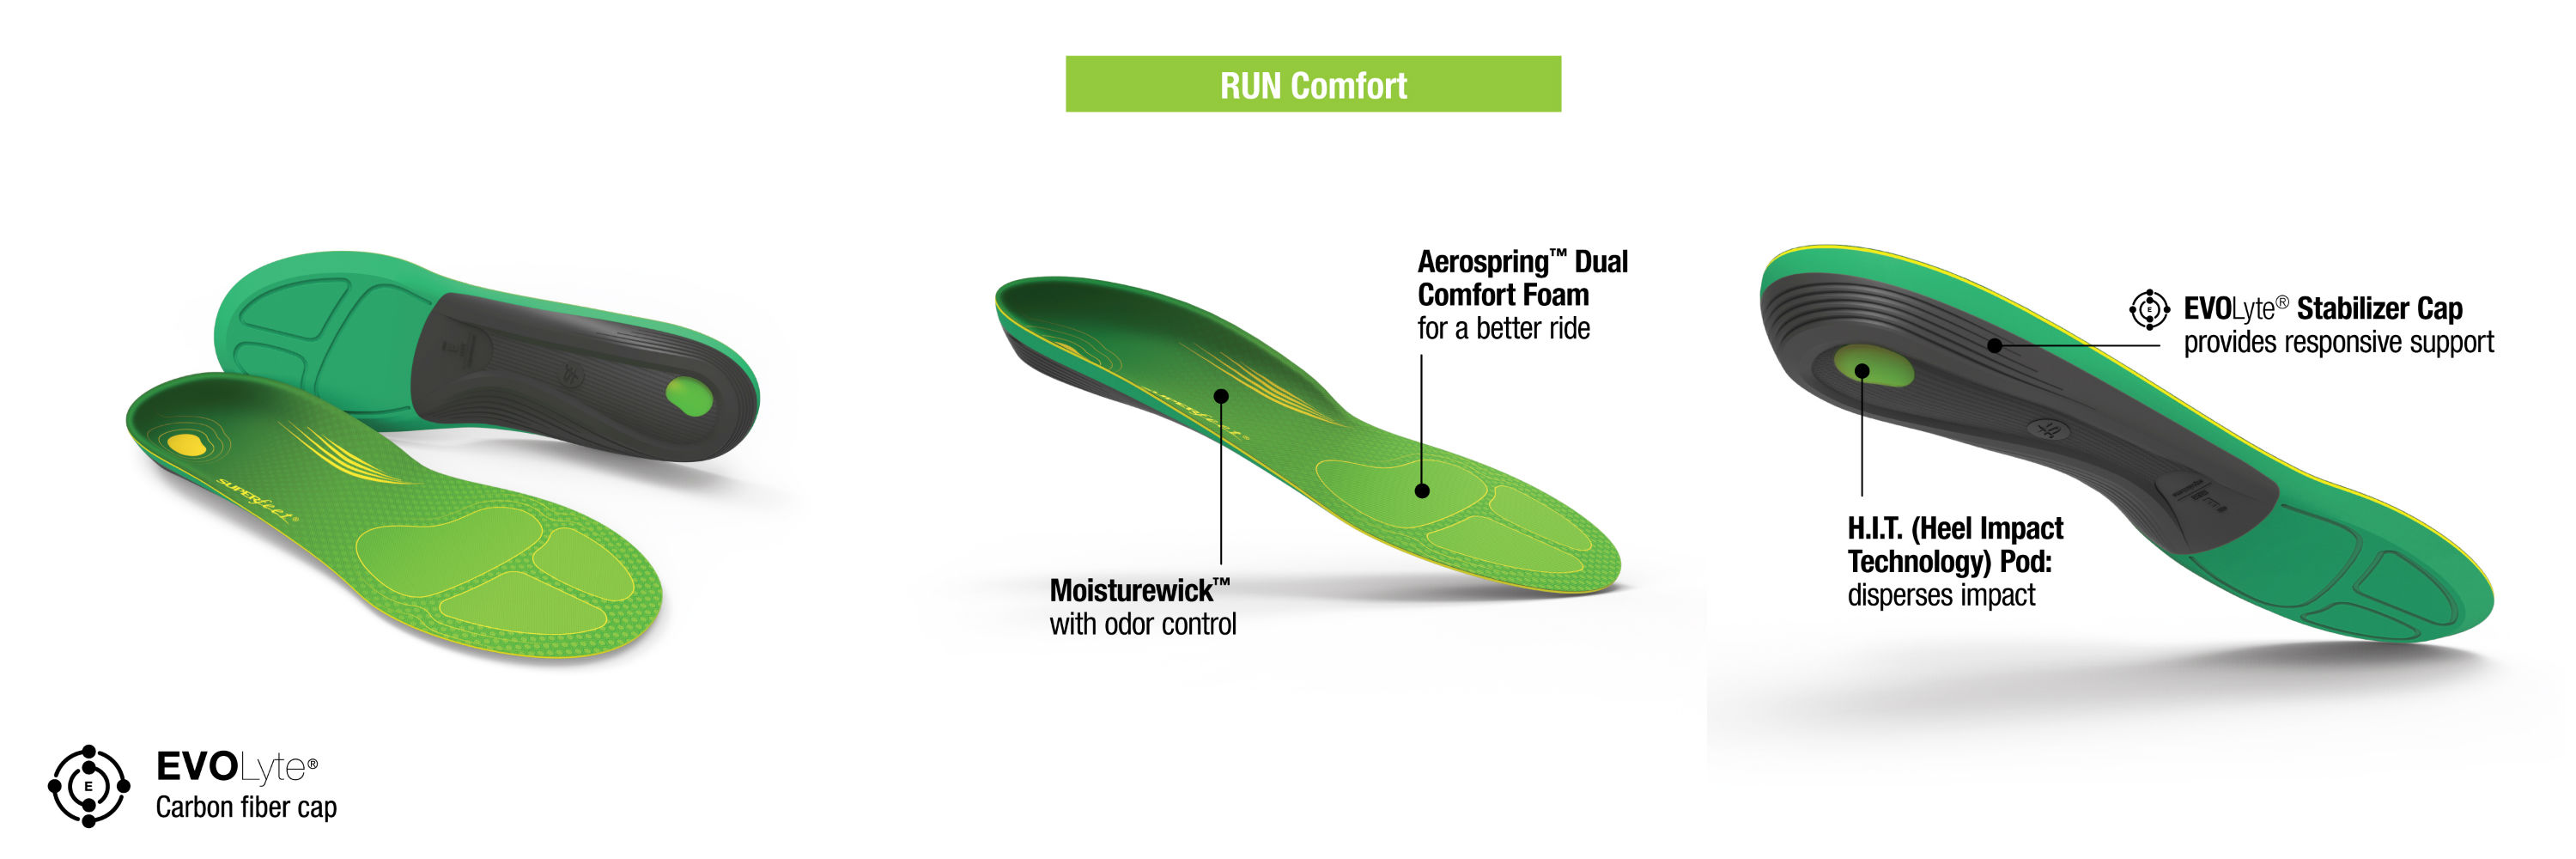 superfeet green support and comfort insoles